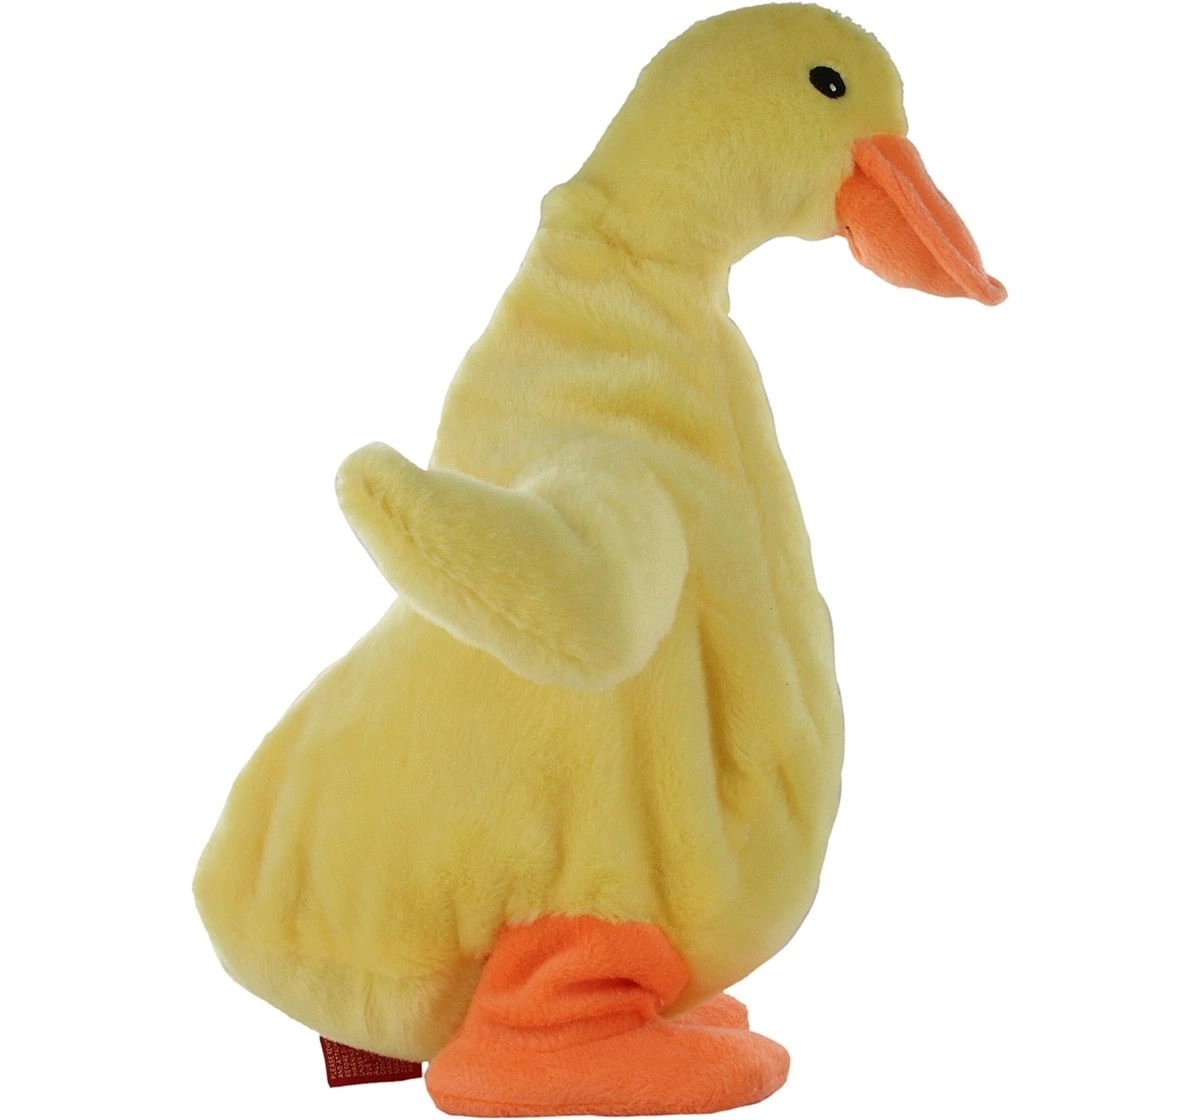  Hamleys Movers & Shakers -  Duck  Interactive Soft Toys for Kids age 3Y+ - 12 Cm (Yellow)